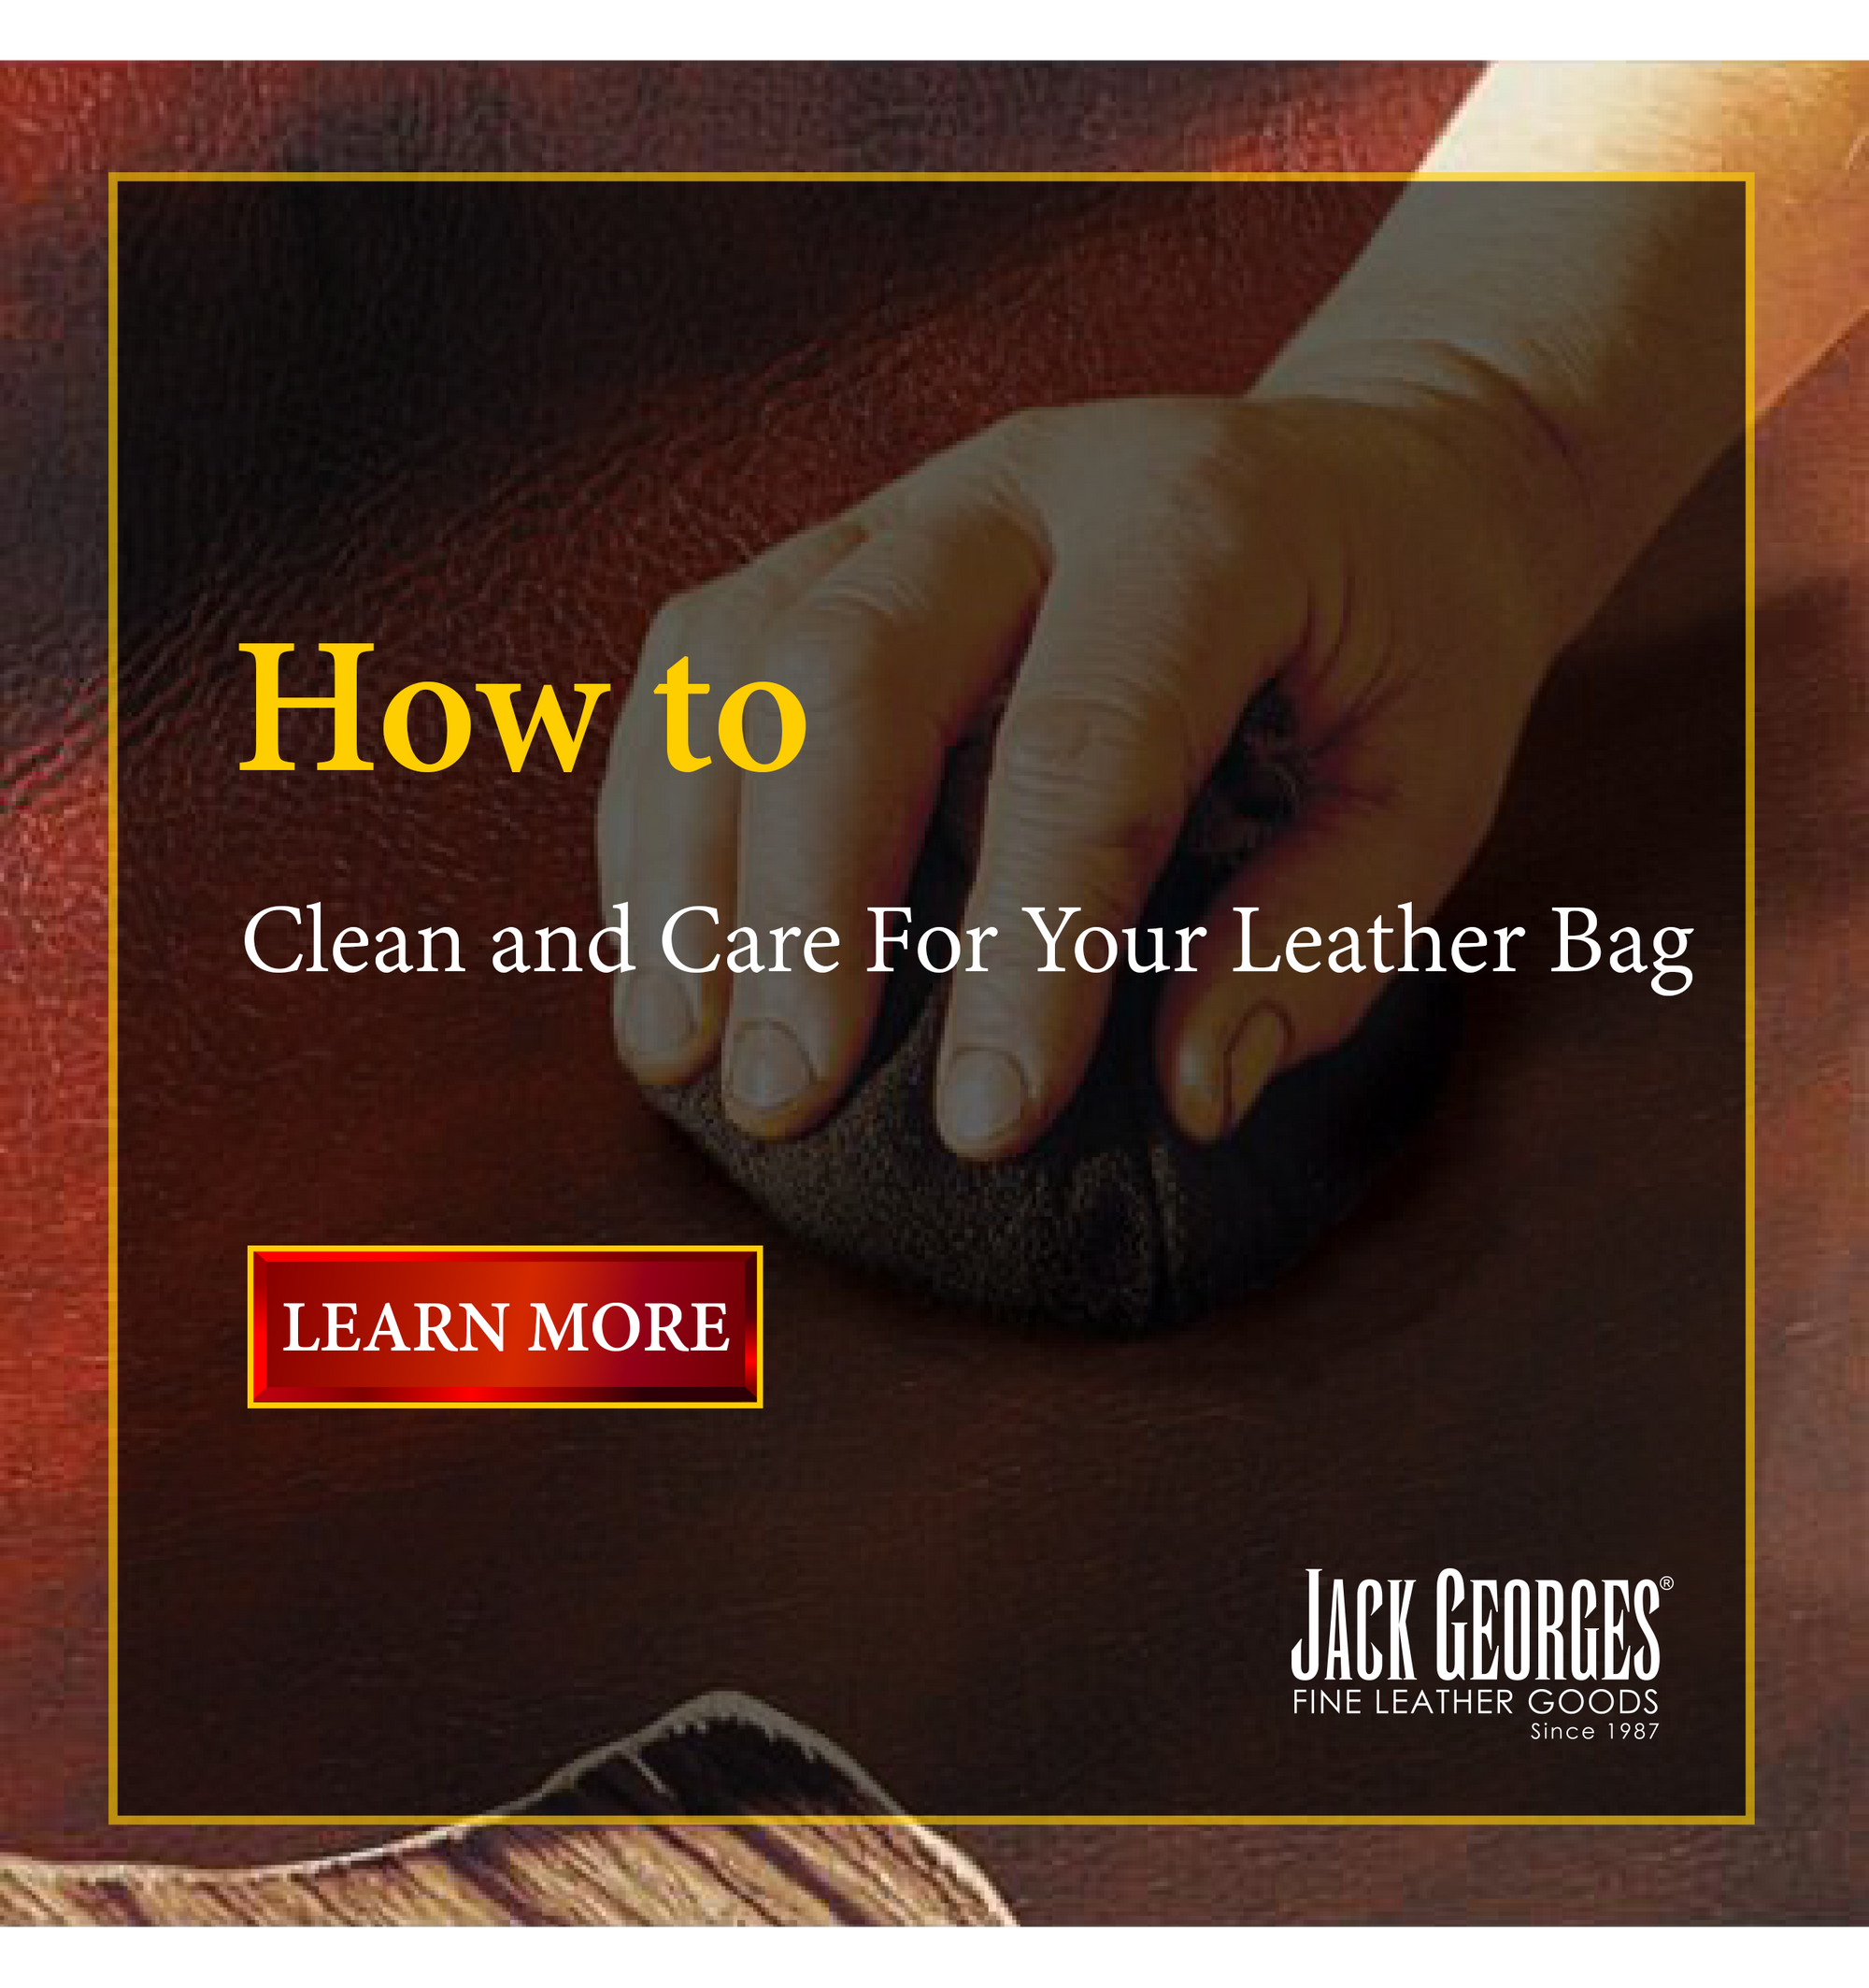 How To Clean and Care Your Leather Bag